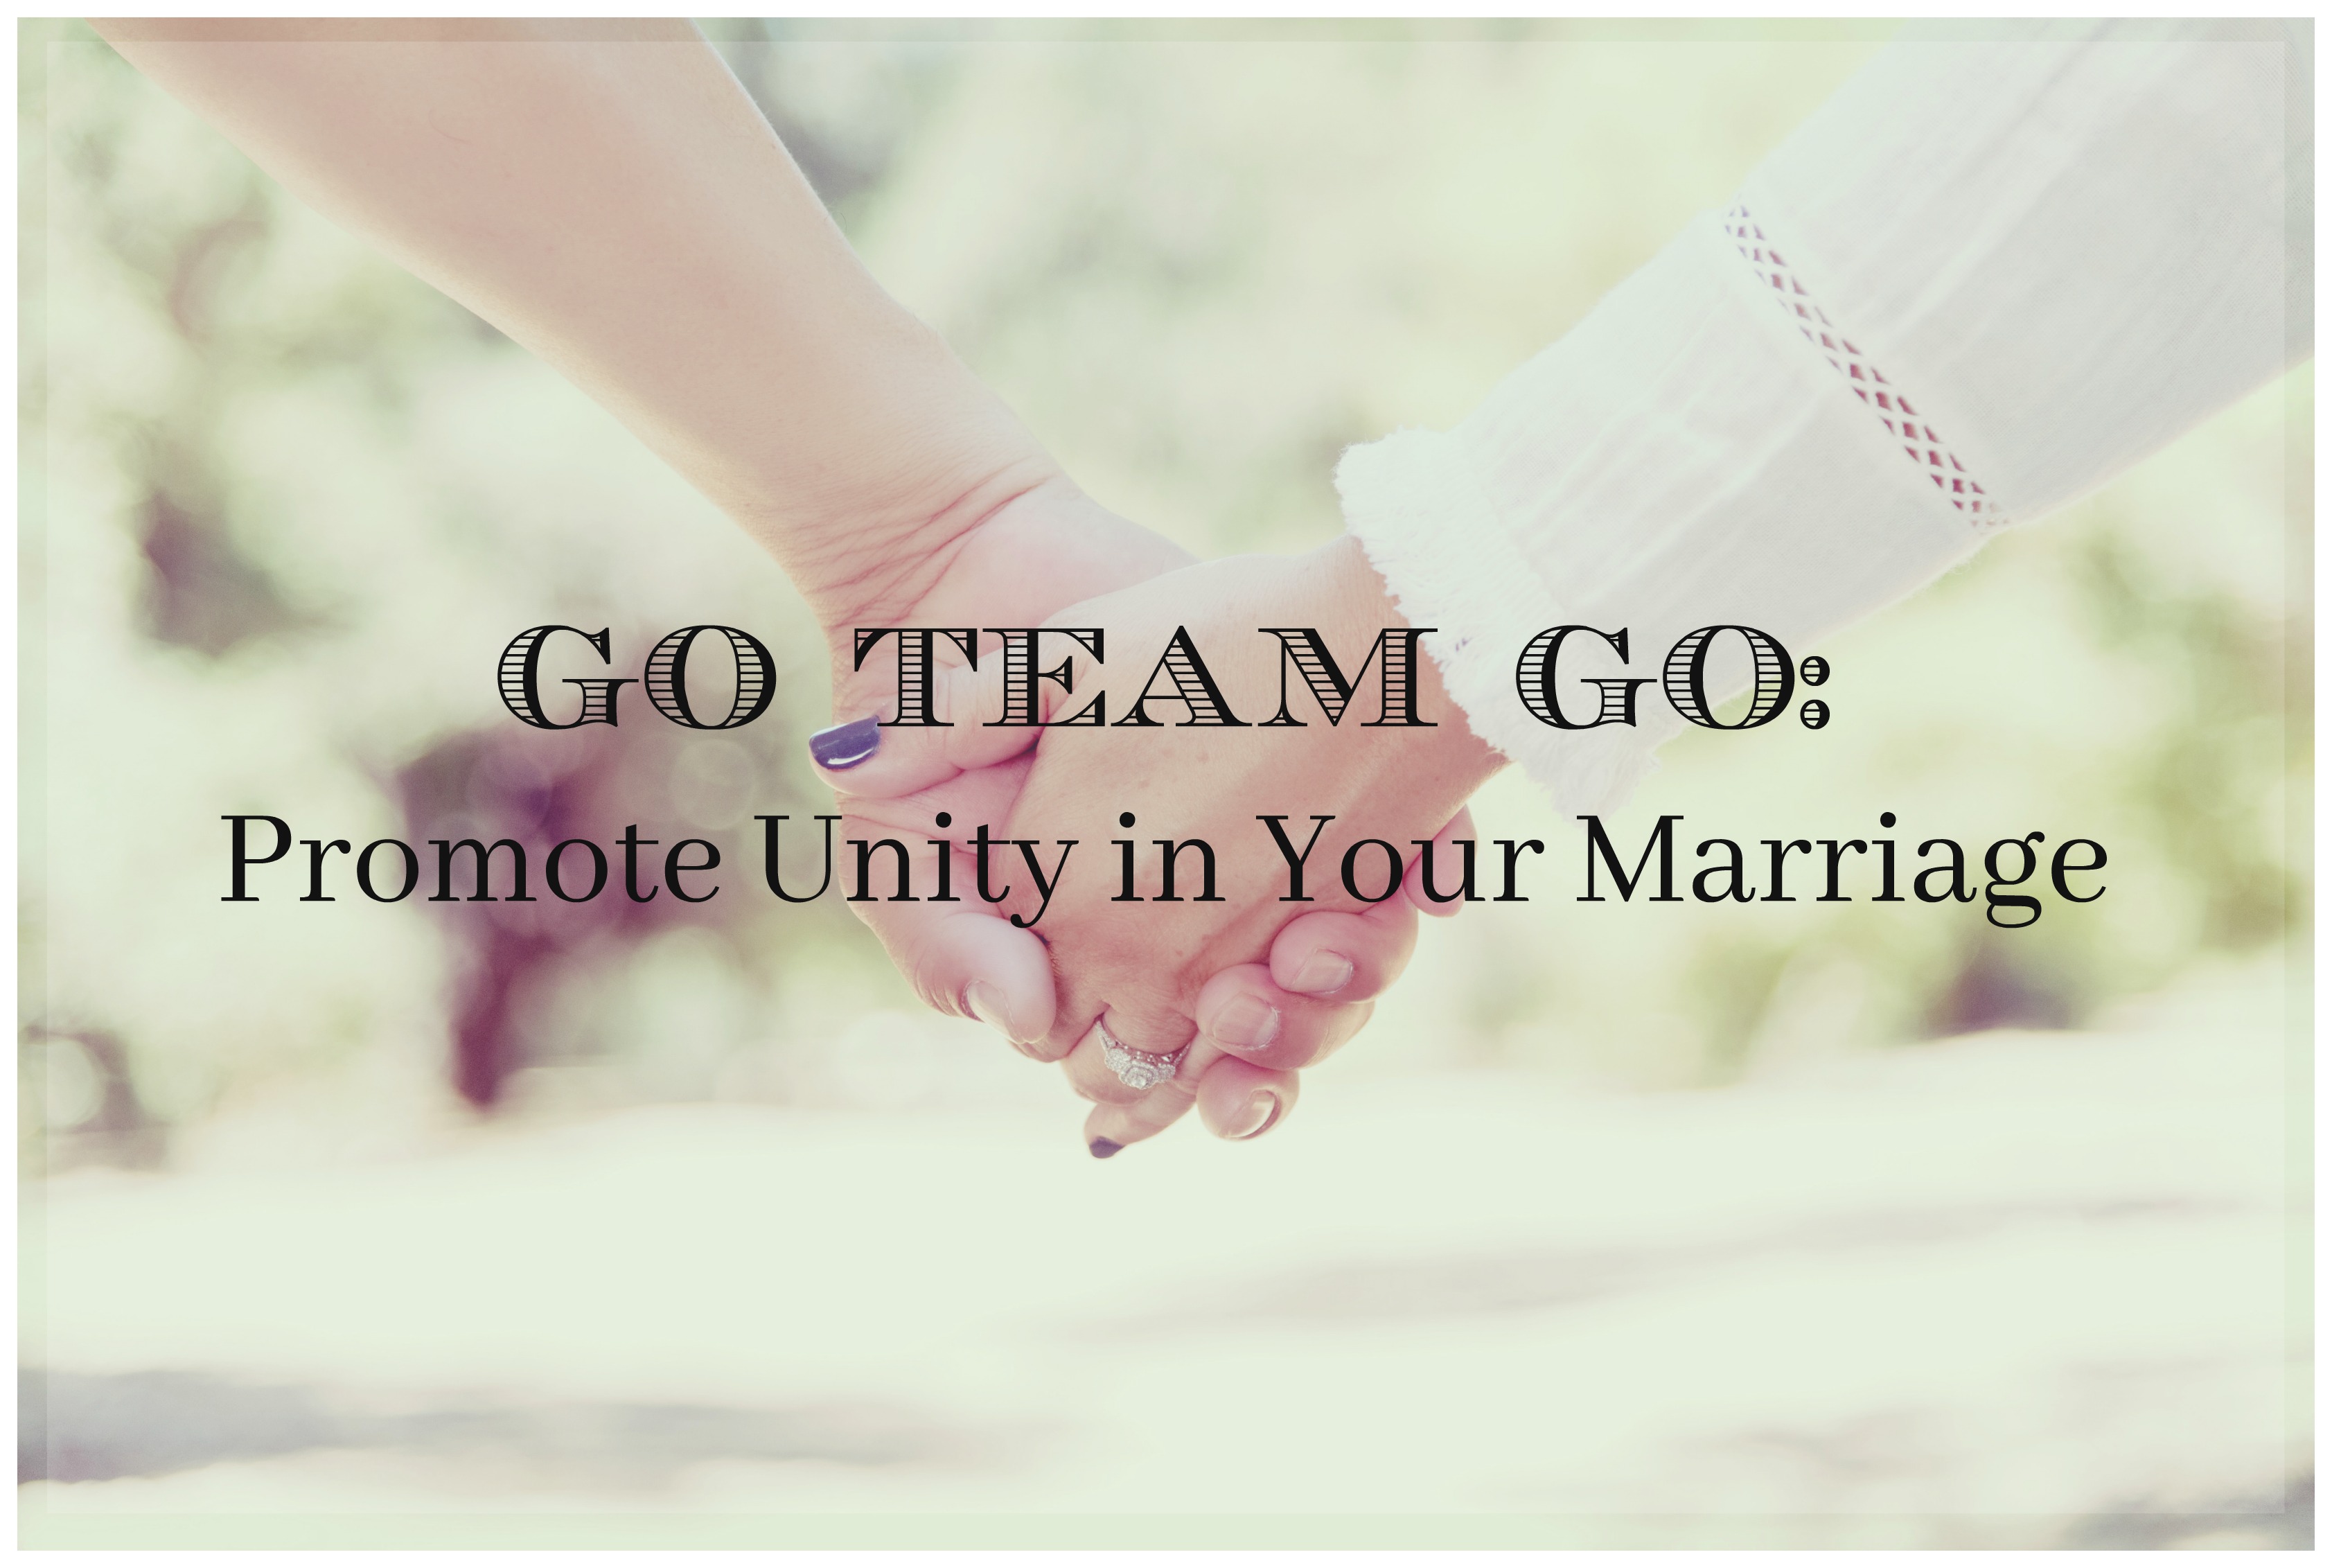 Go Team Go: How to Promote Unity in Marriage